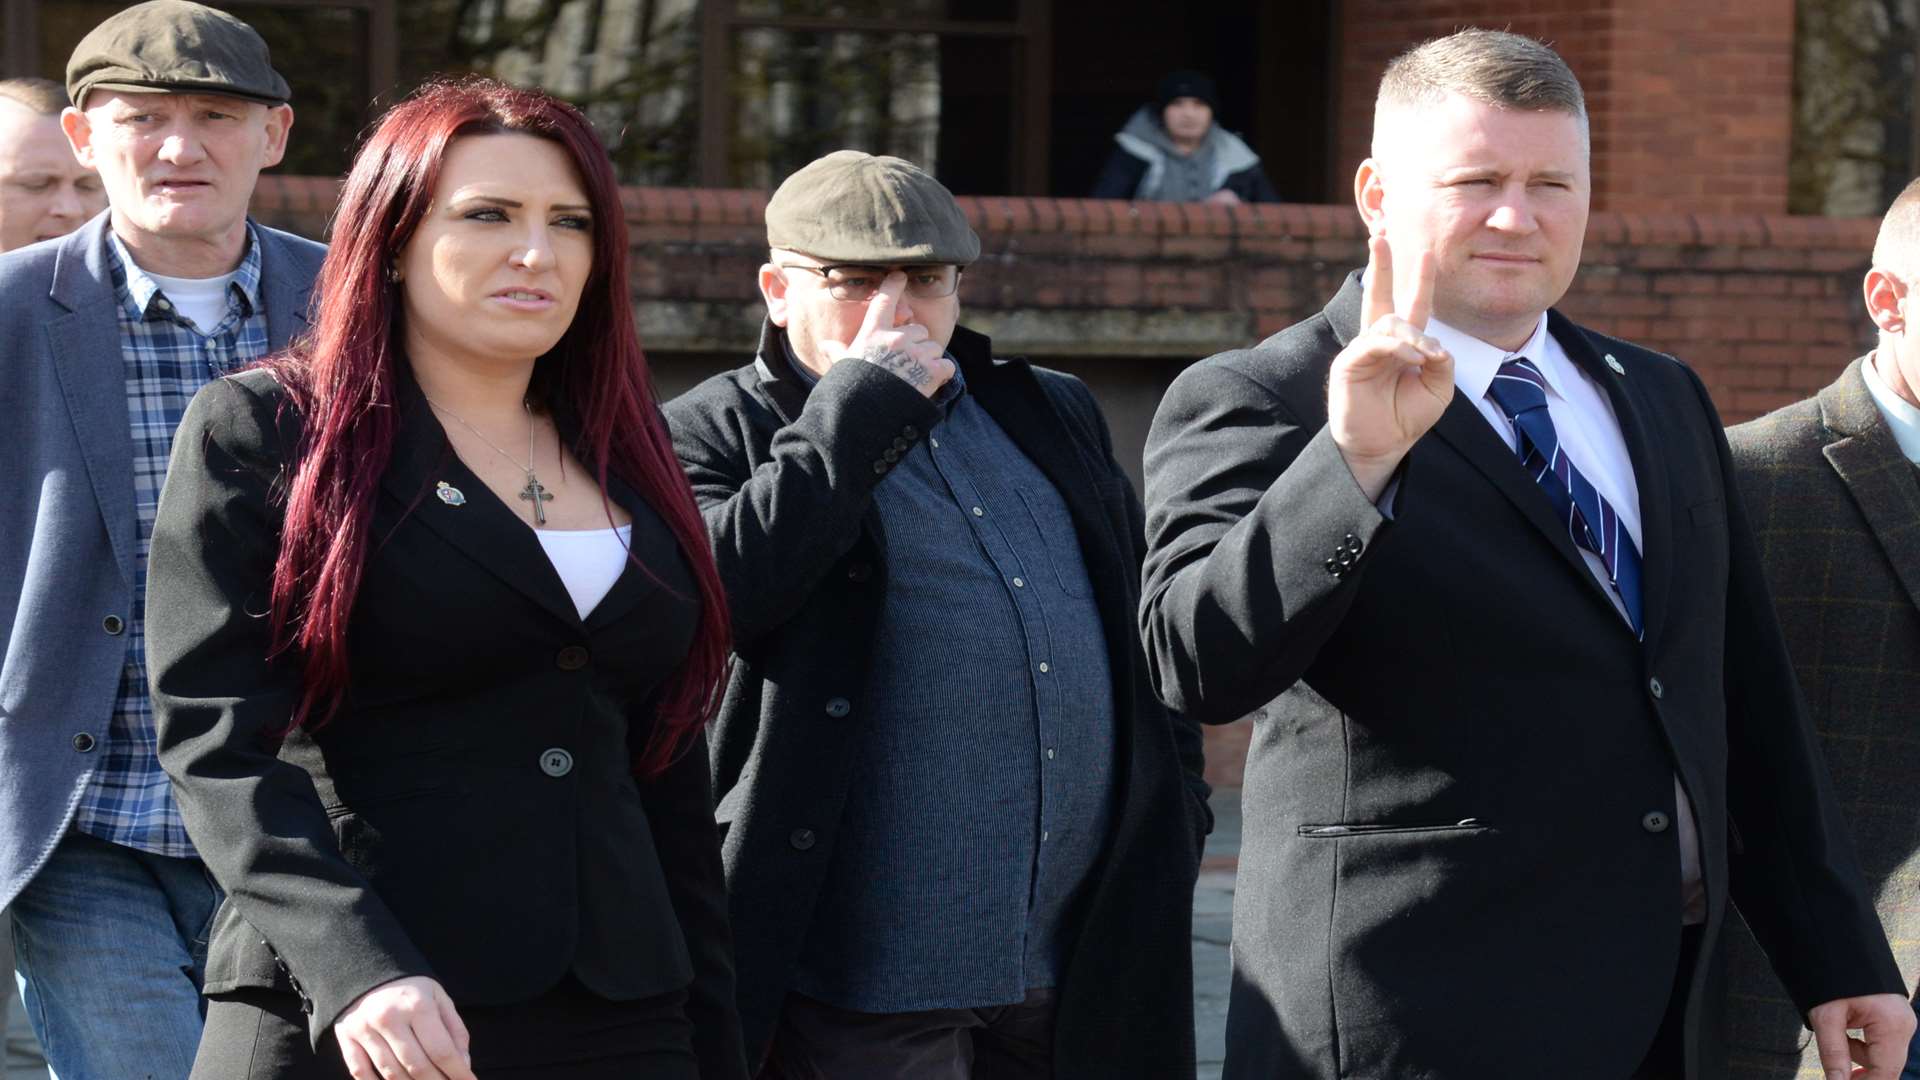 Britain First leader Paul Golding, right, and deputy leader Jayda Fransen arrive at Folkestone Magistrates Court